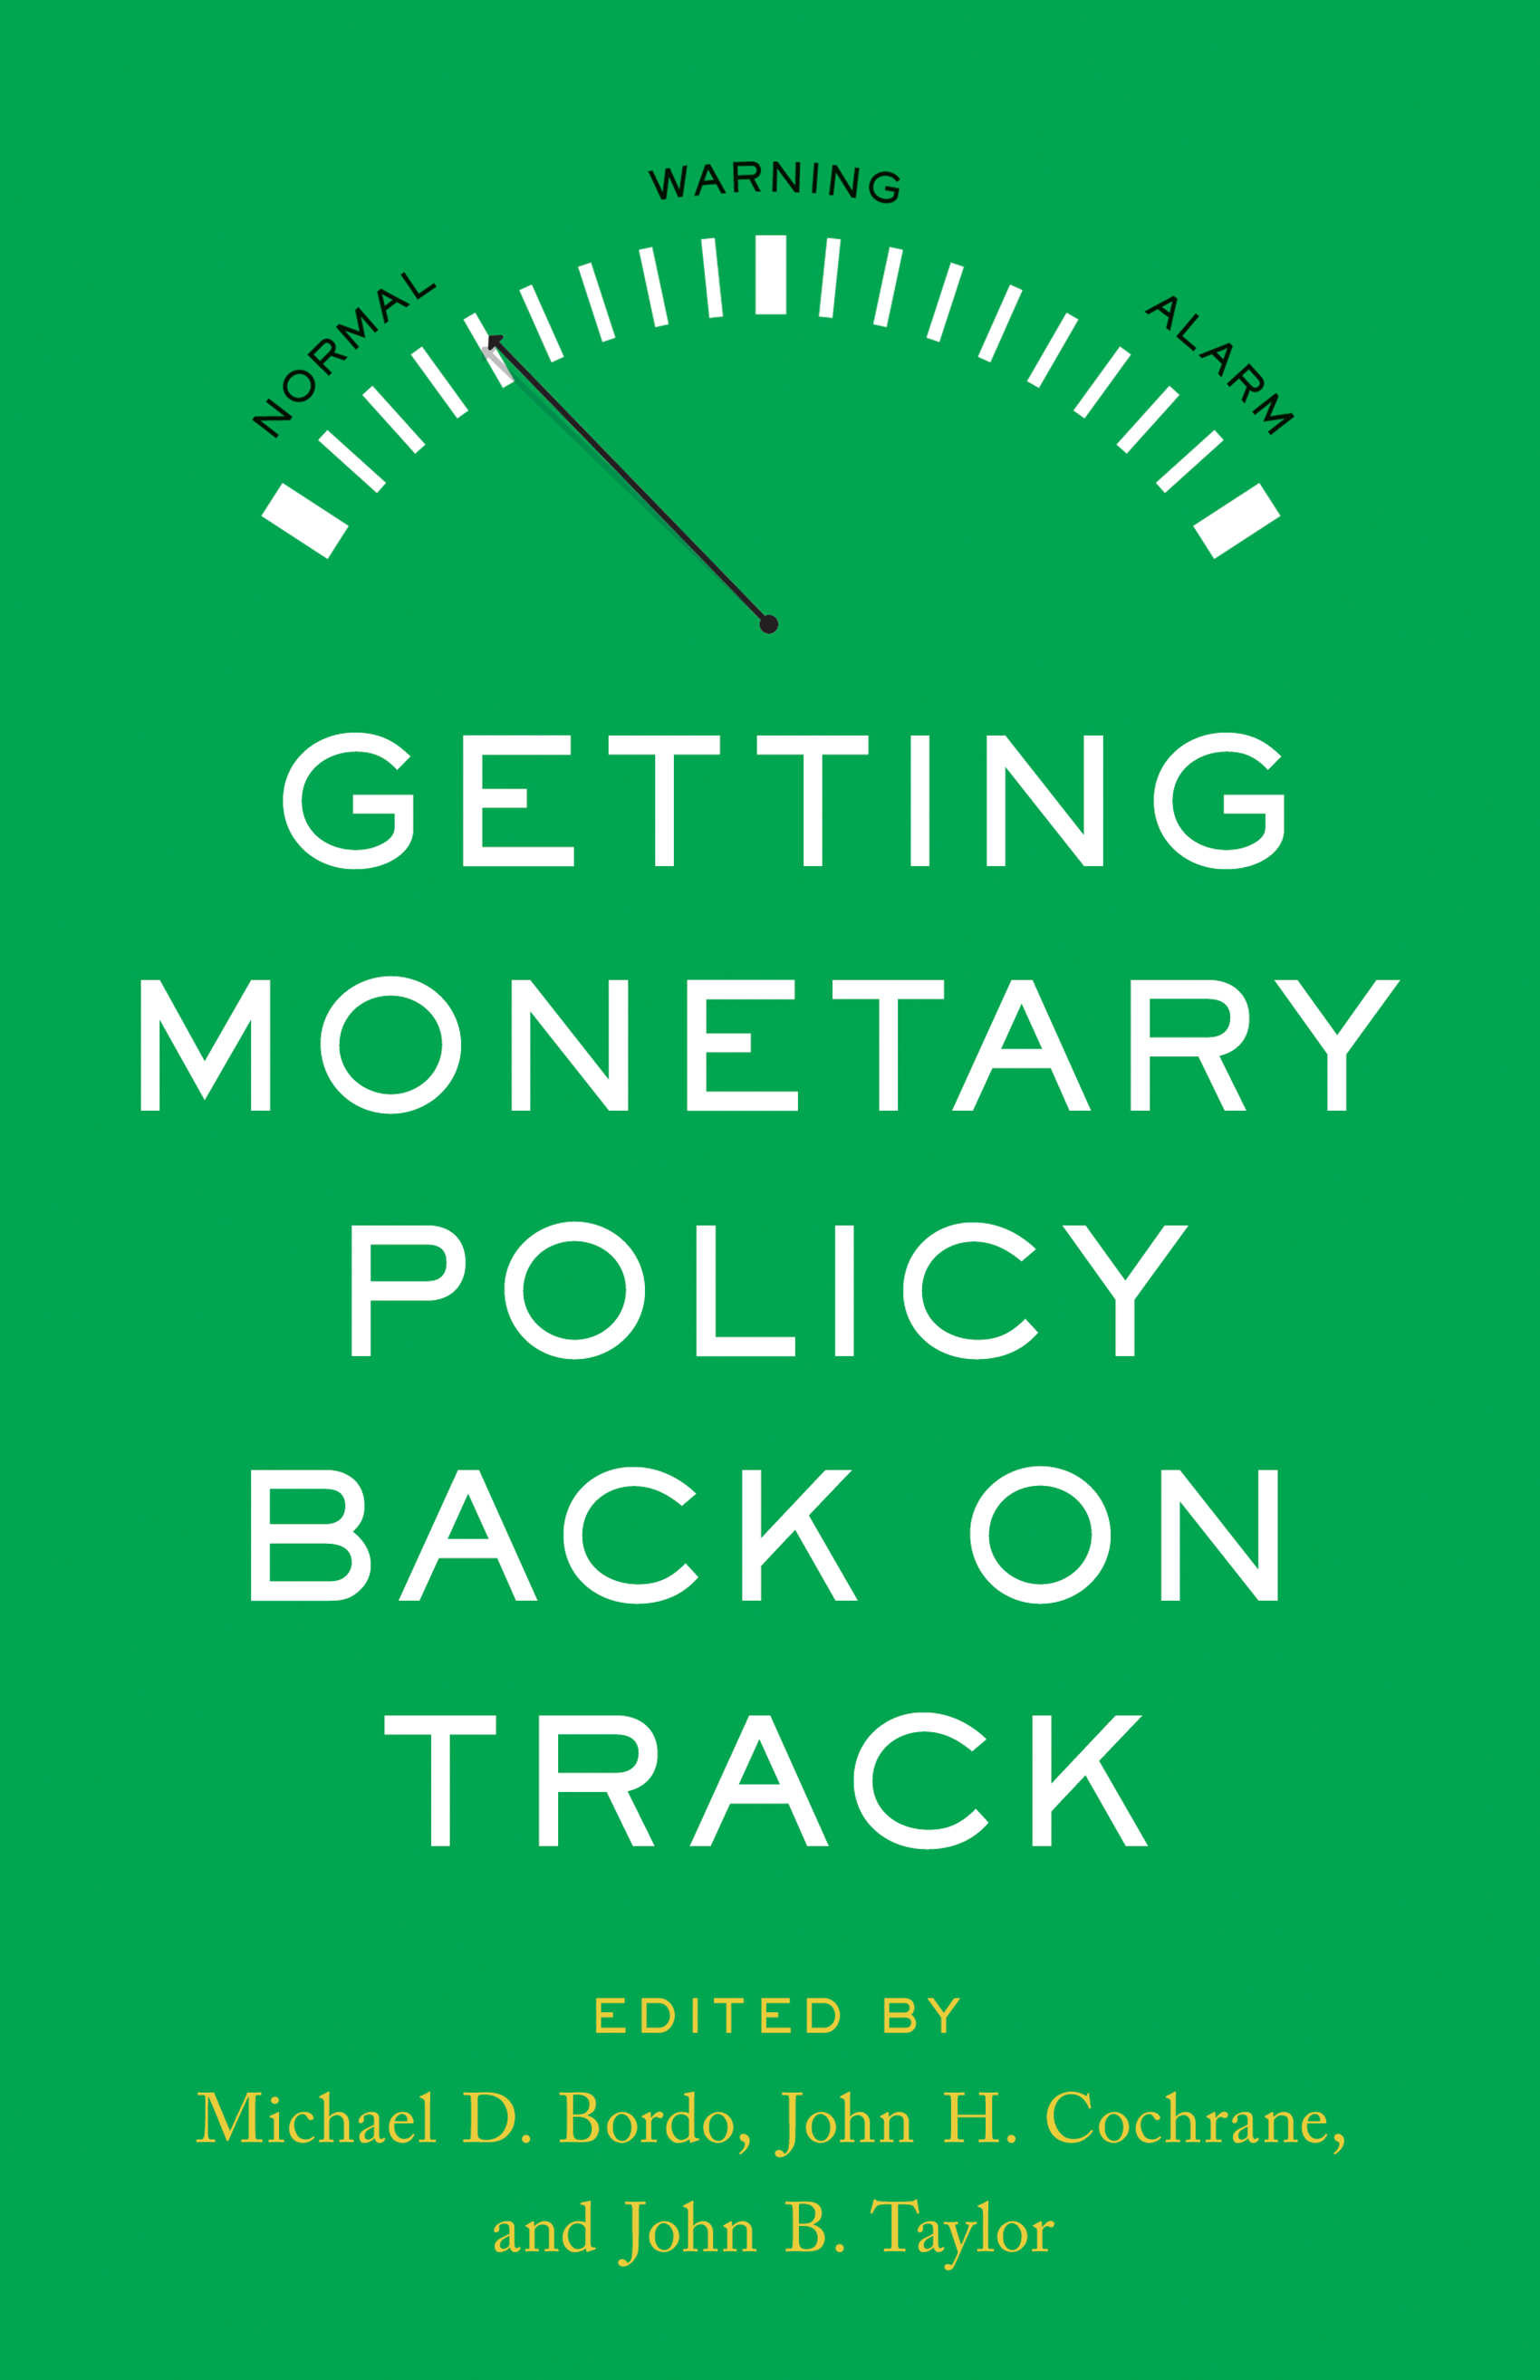 Getting Monetary Policy Back on Track